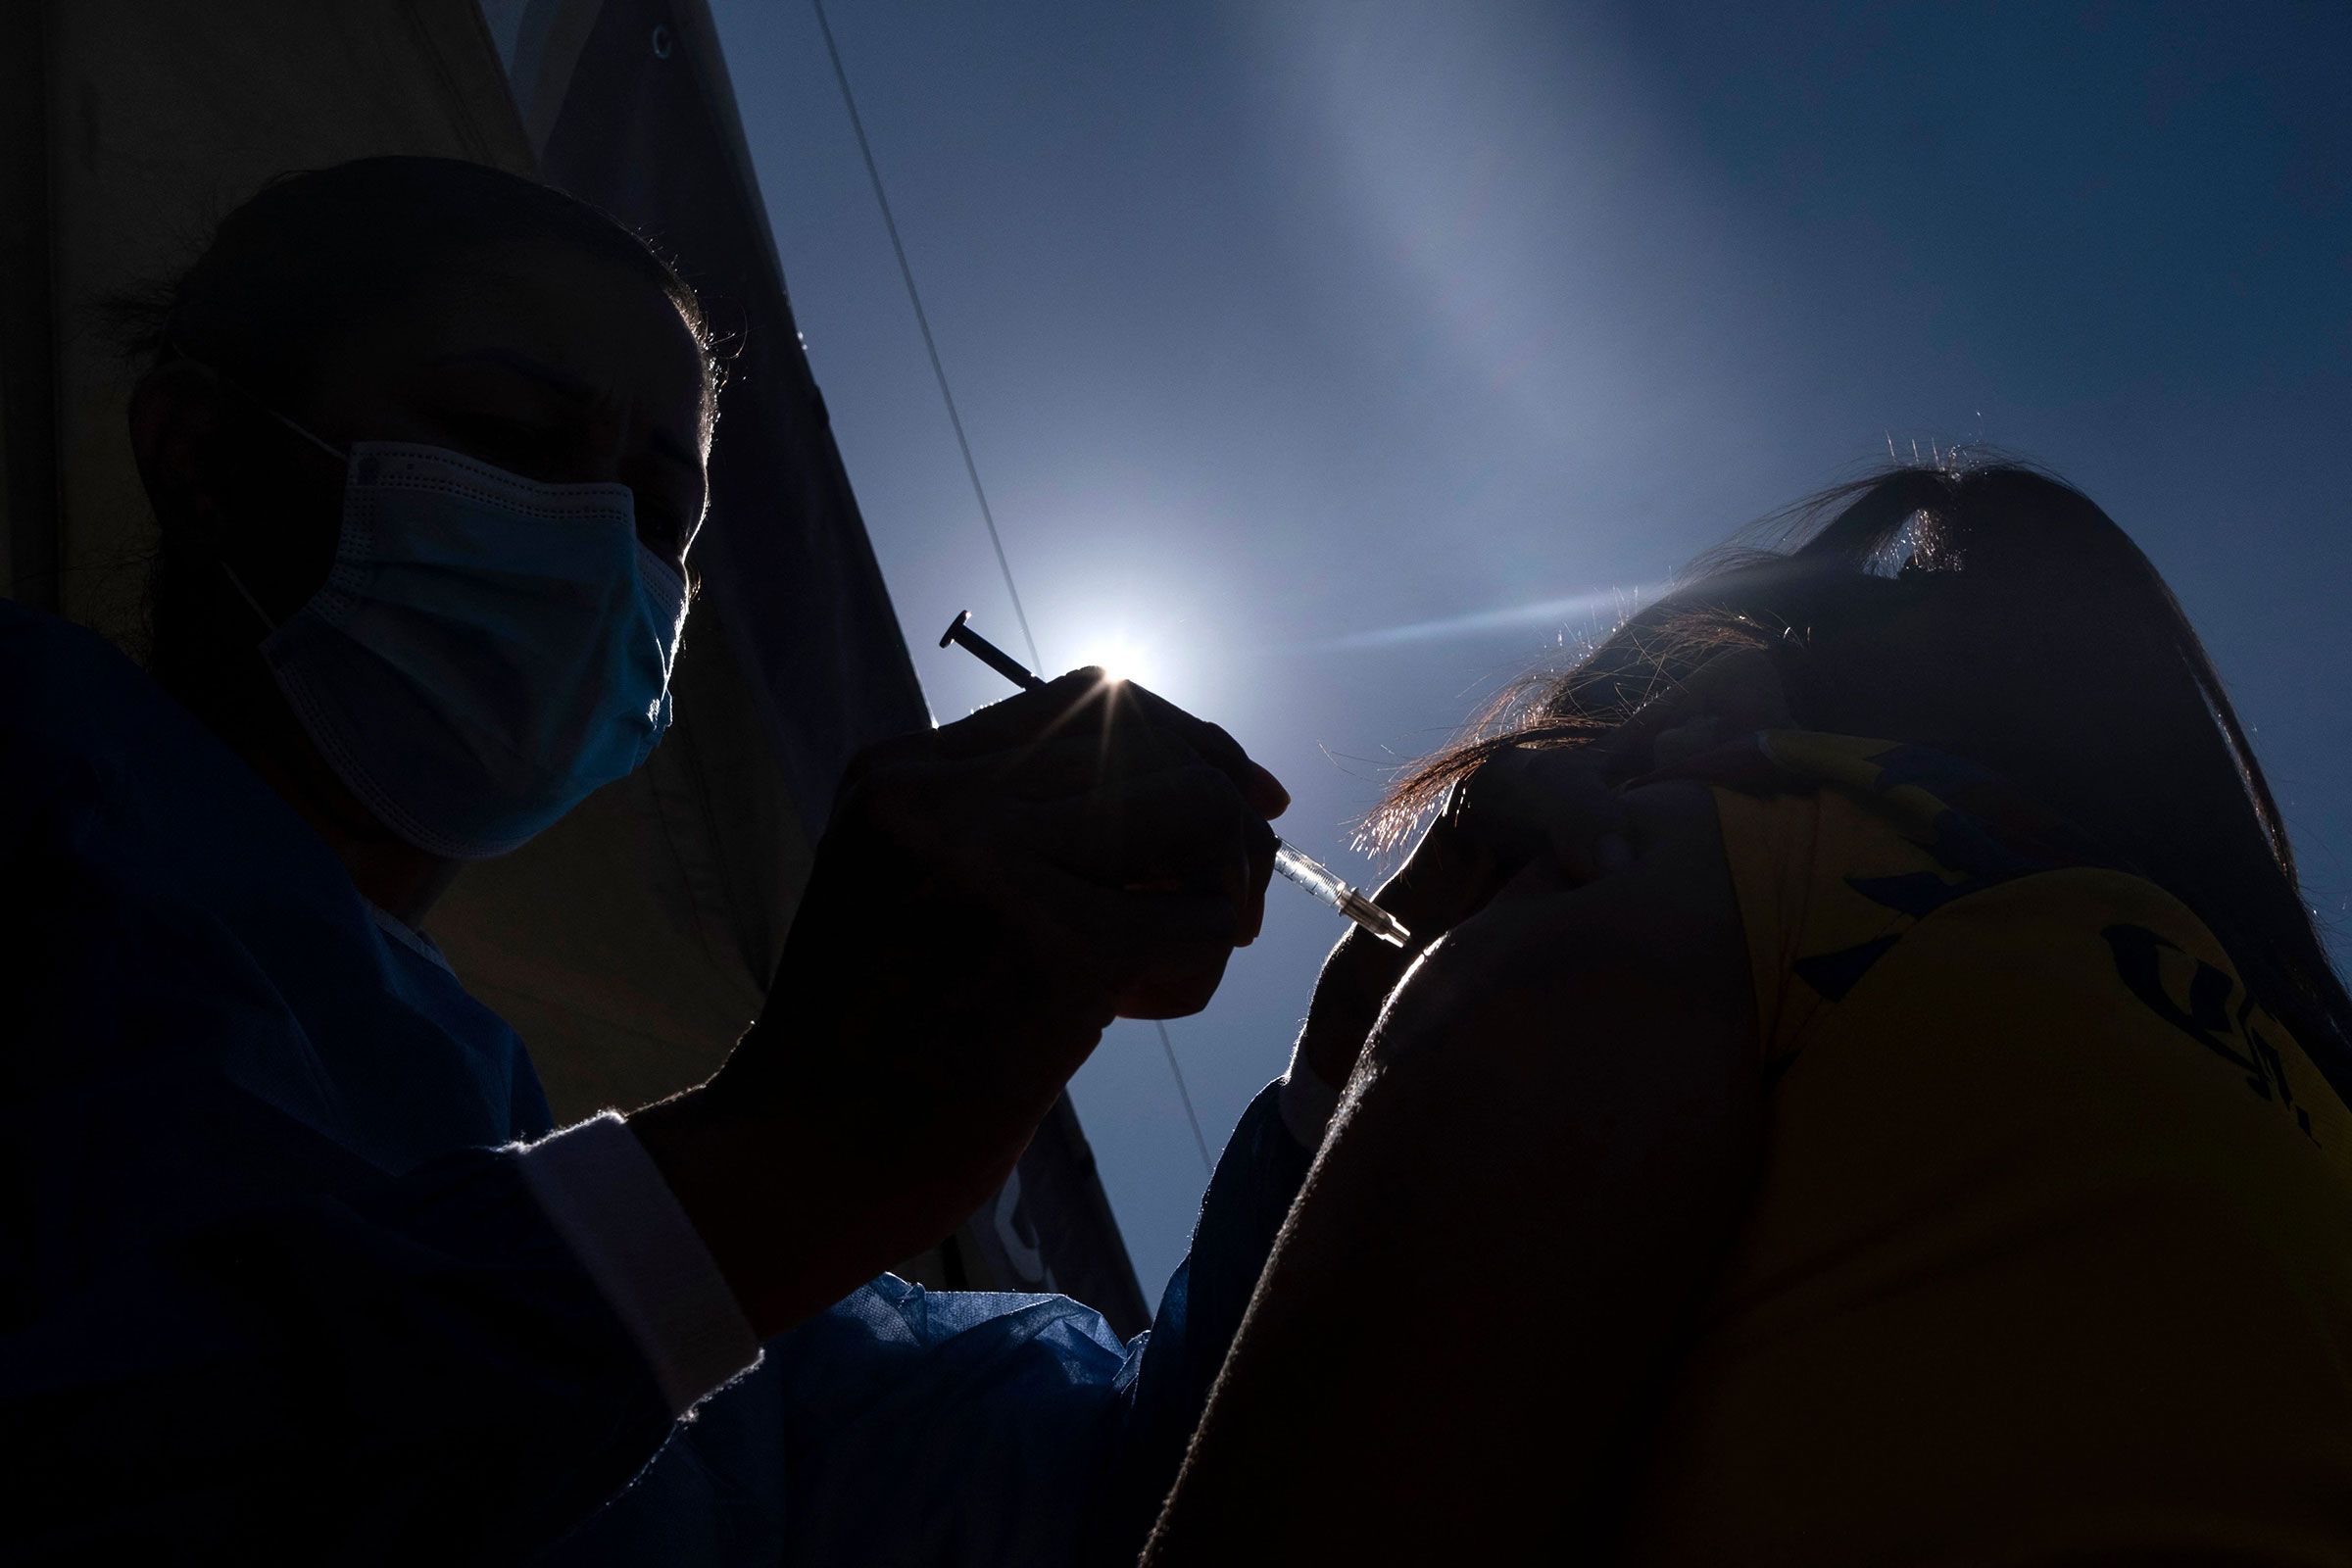 An asylum seeker camping on the border with the U.S. in Tijuana, Mexico, is vaccinated against COVID-19 on Aug. 3 (Guillermo Arias—AFP/Getty Images)